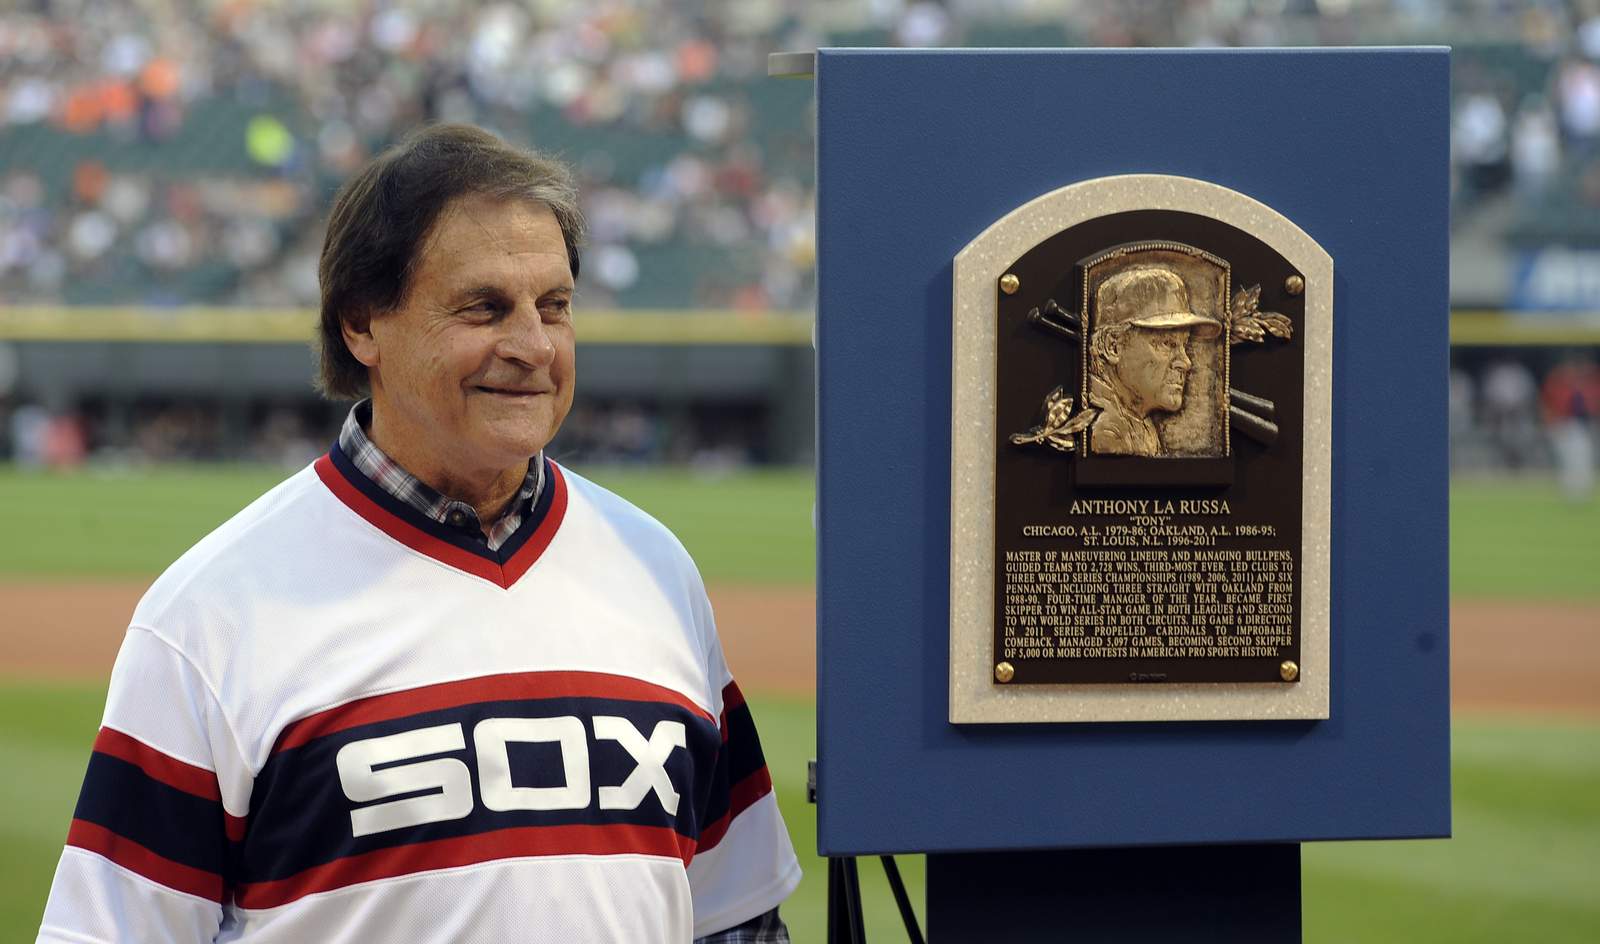 White Sox manager Tony La Russa charged with DUI